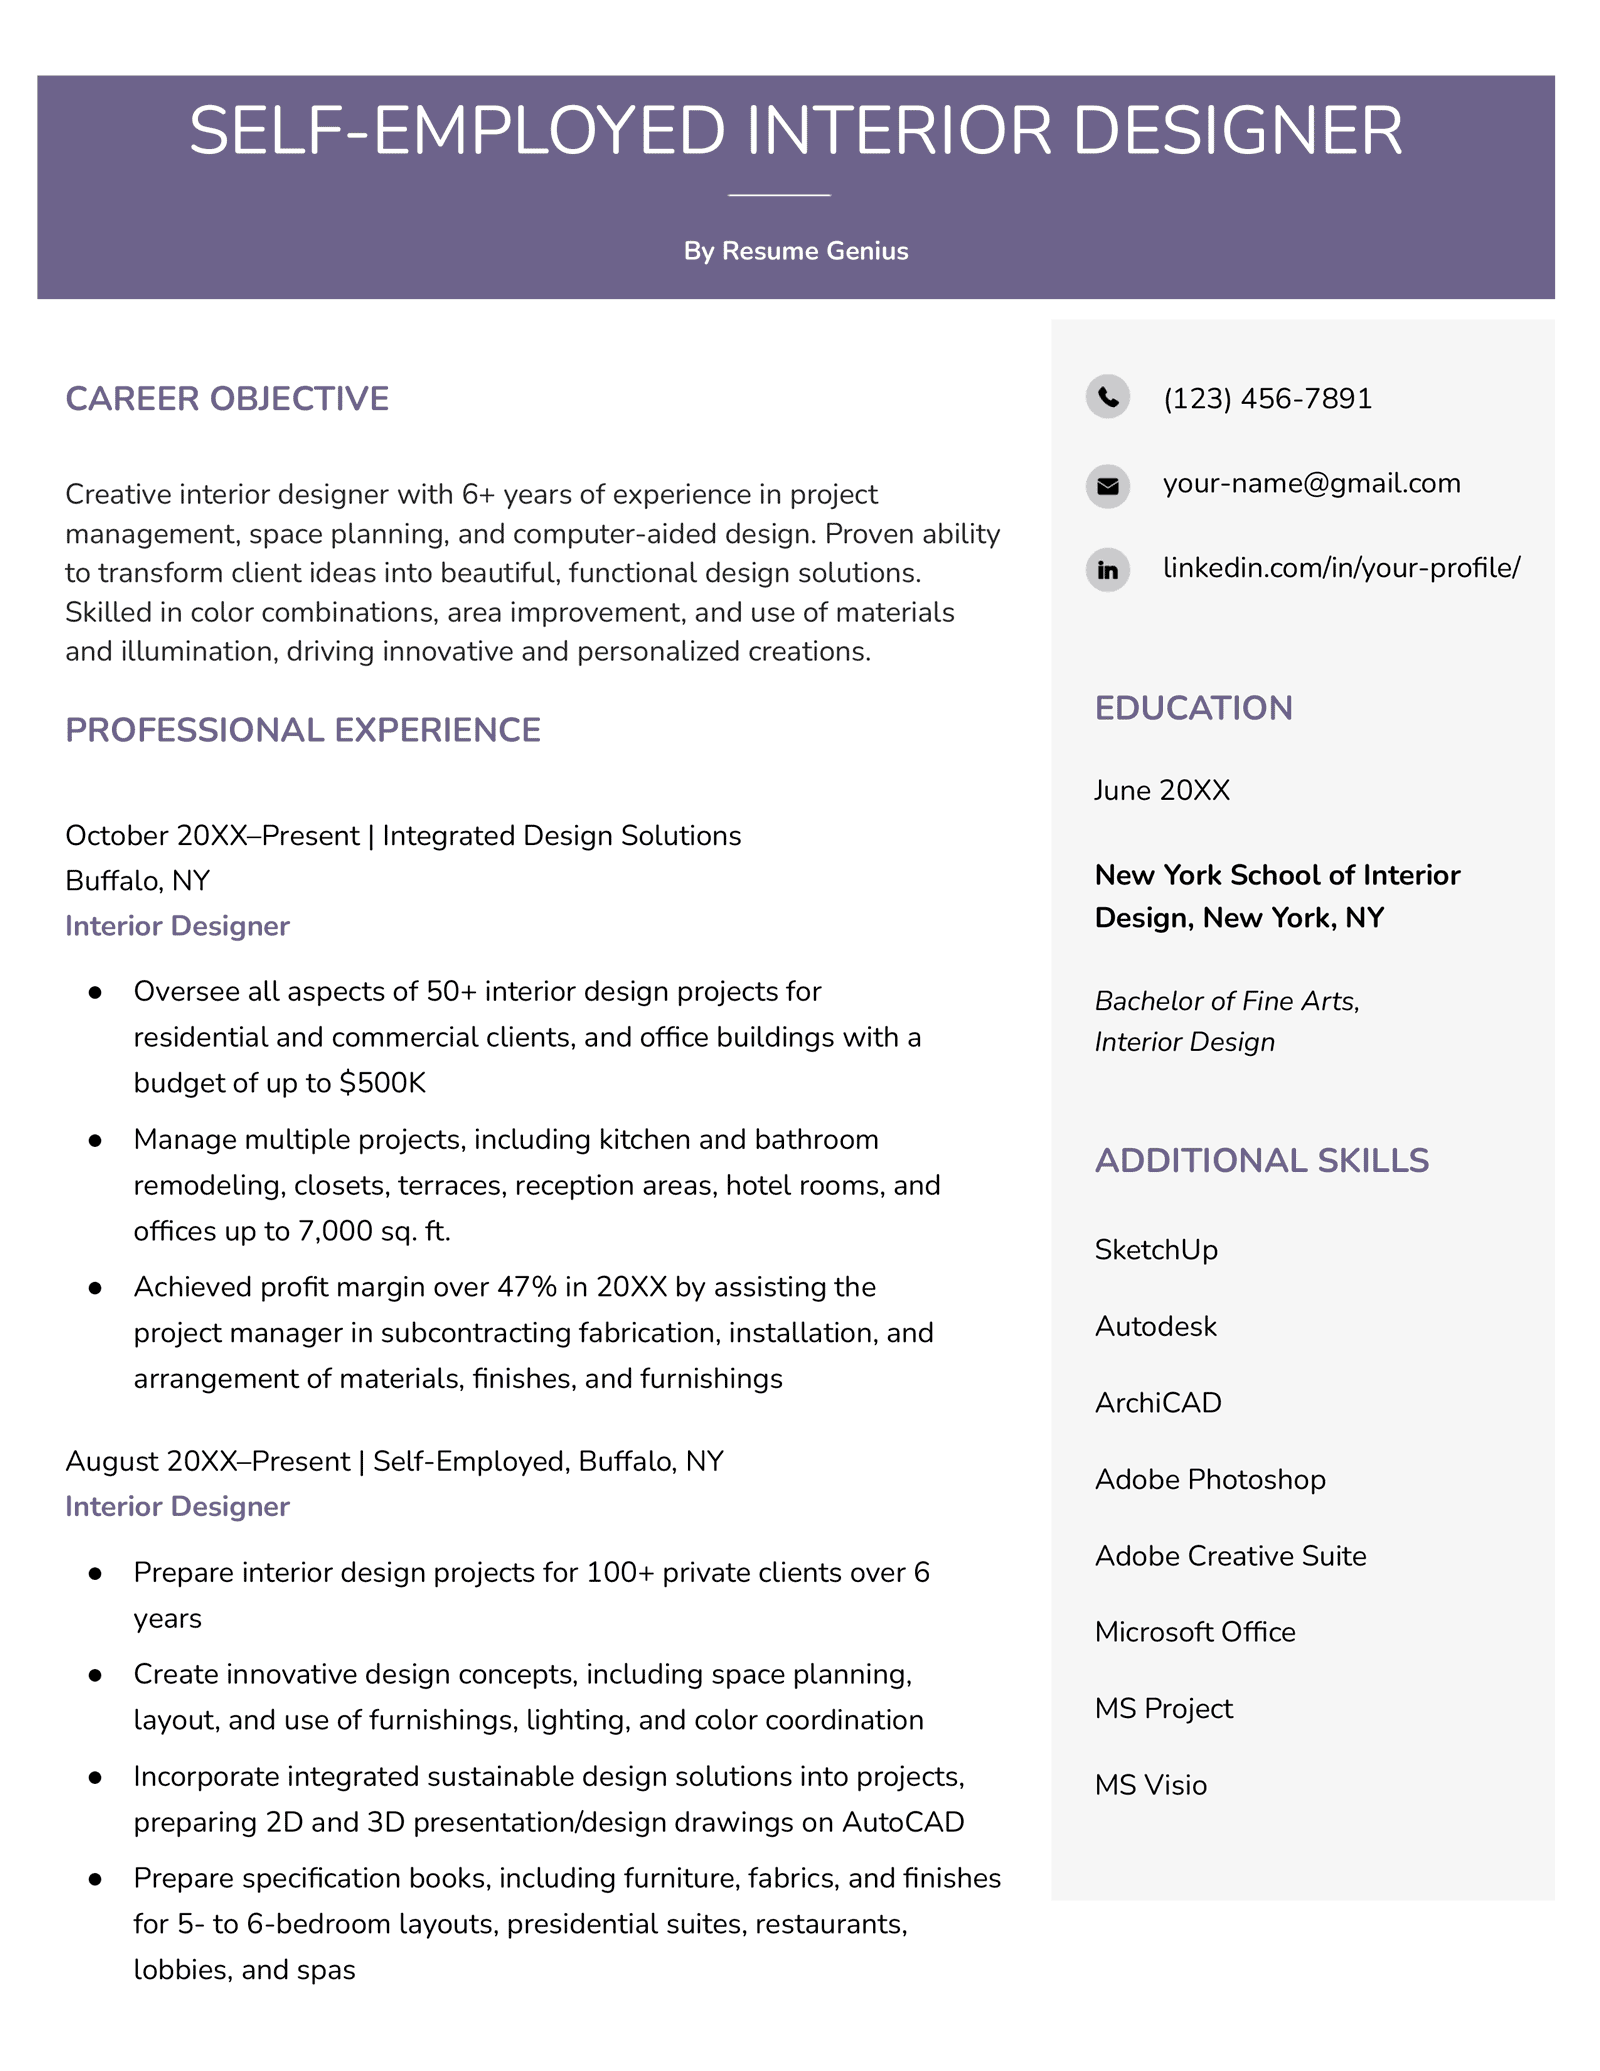 A self-employed resume sample that effectively showcases the part-time self-employment in the work experience section by using an appropriate company name and job title, and listing specific projects and accomplishments in a bullet point list.